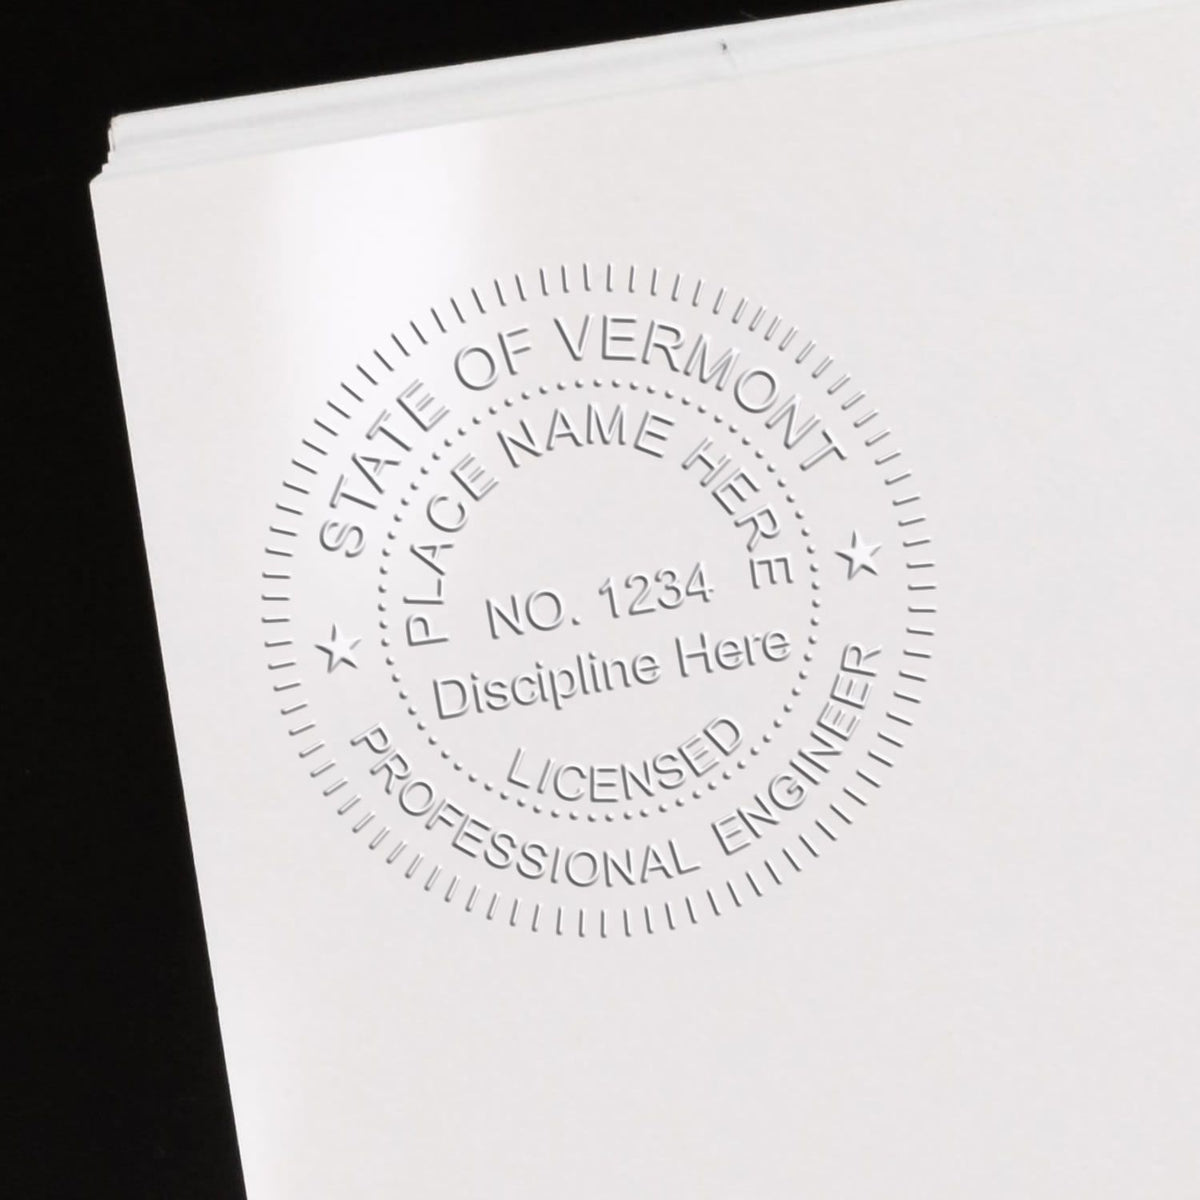 A photograph of the Long Reach Vermont PE Seal stamp impression reveals a vivid, professional image of the on paper.